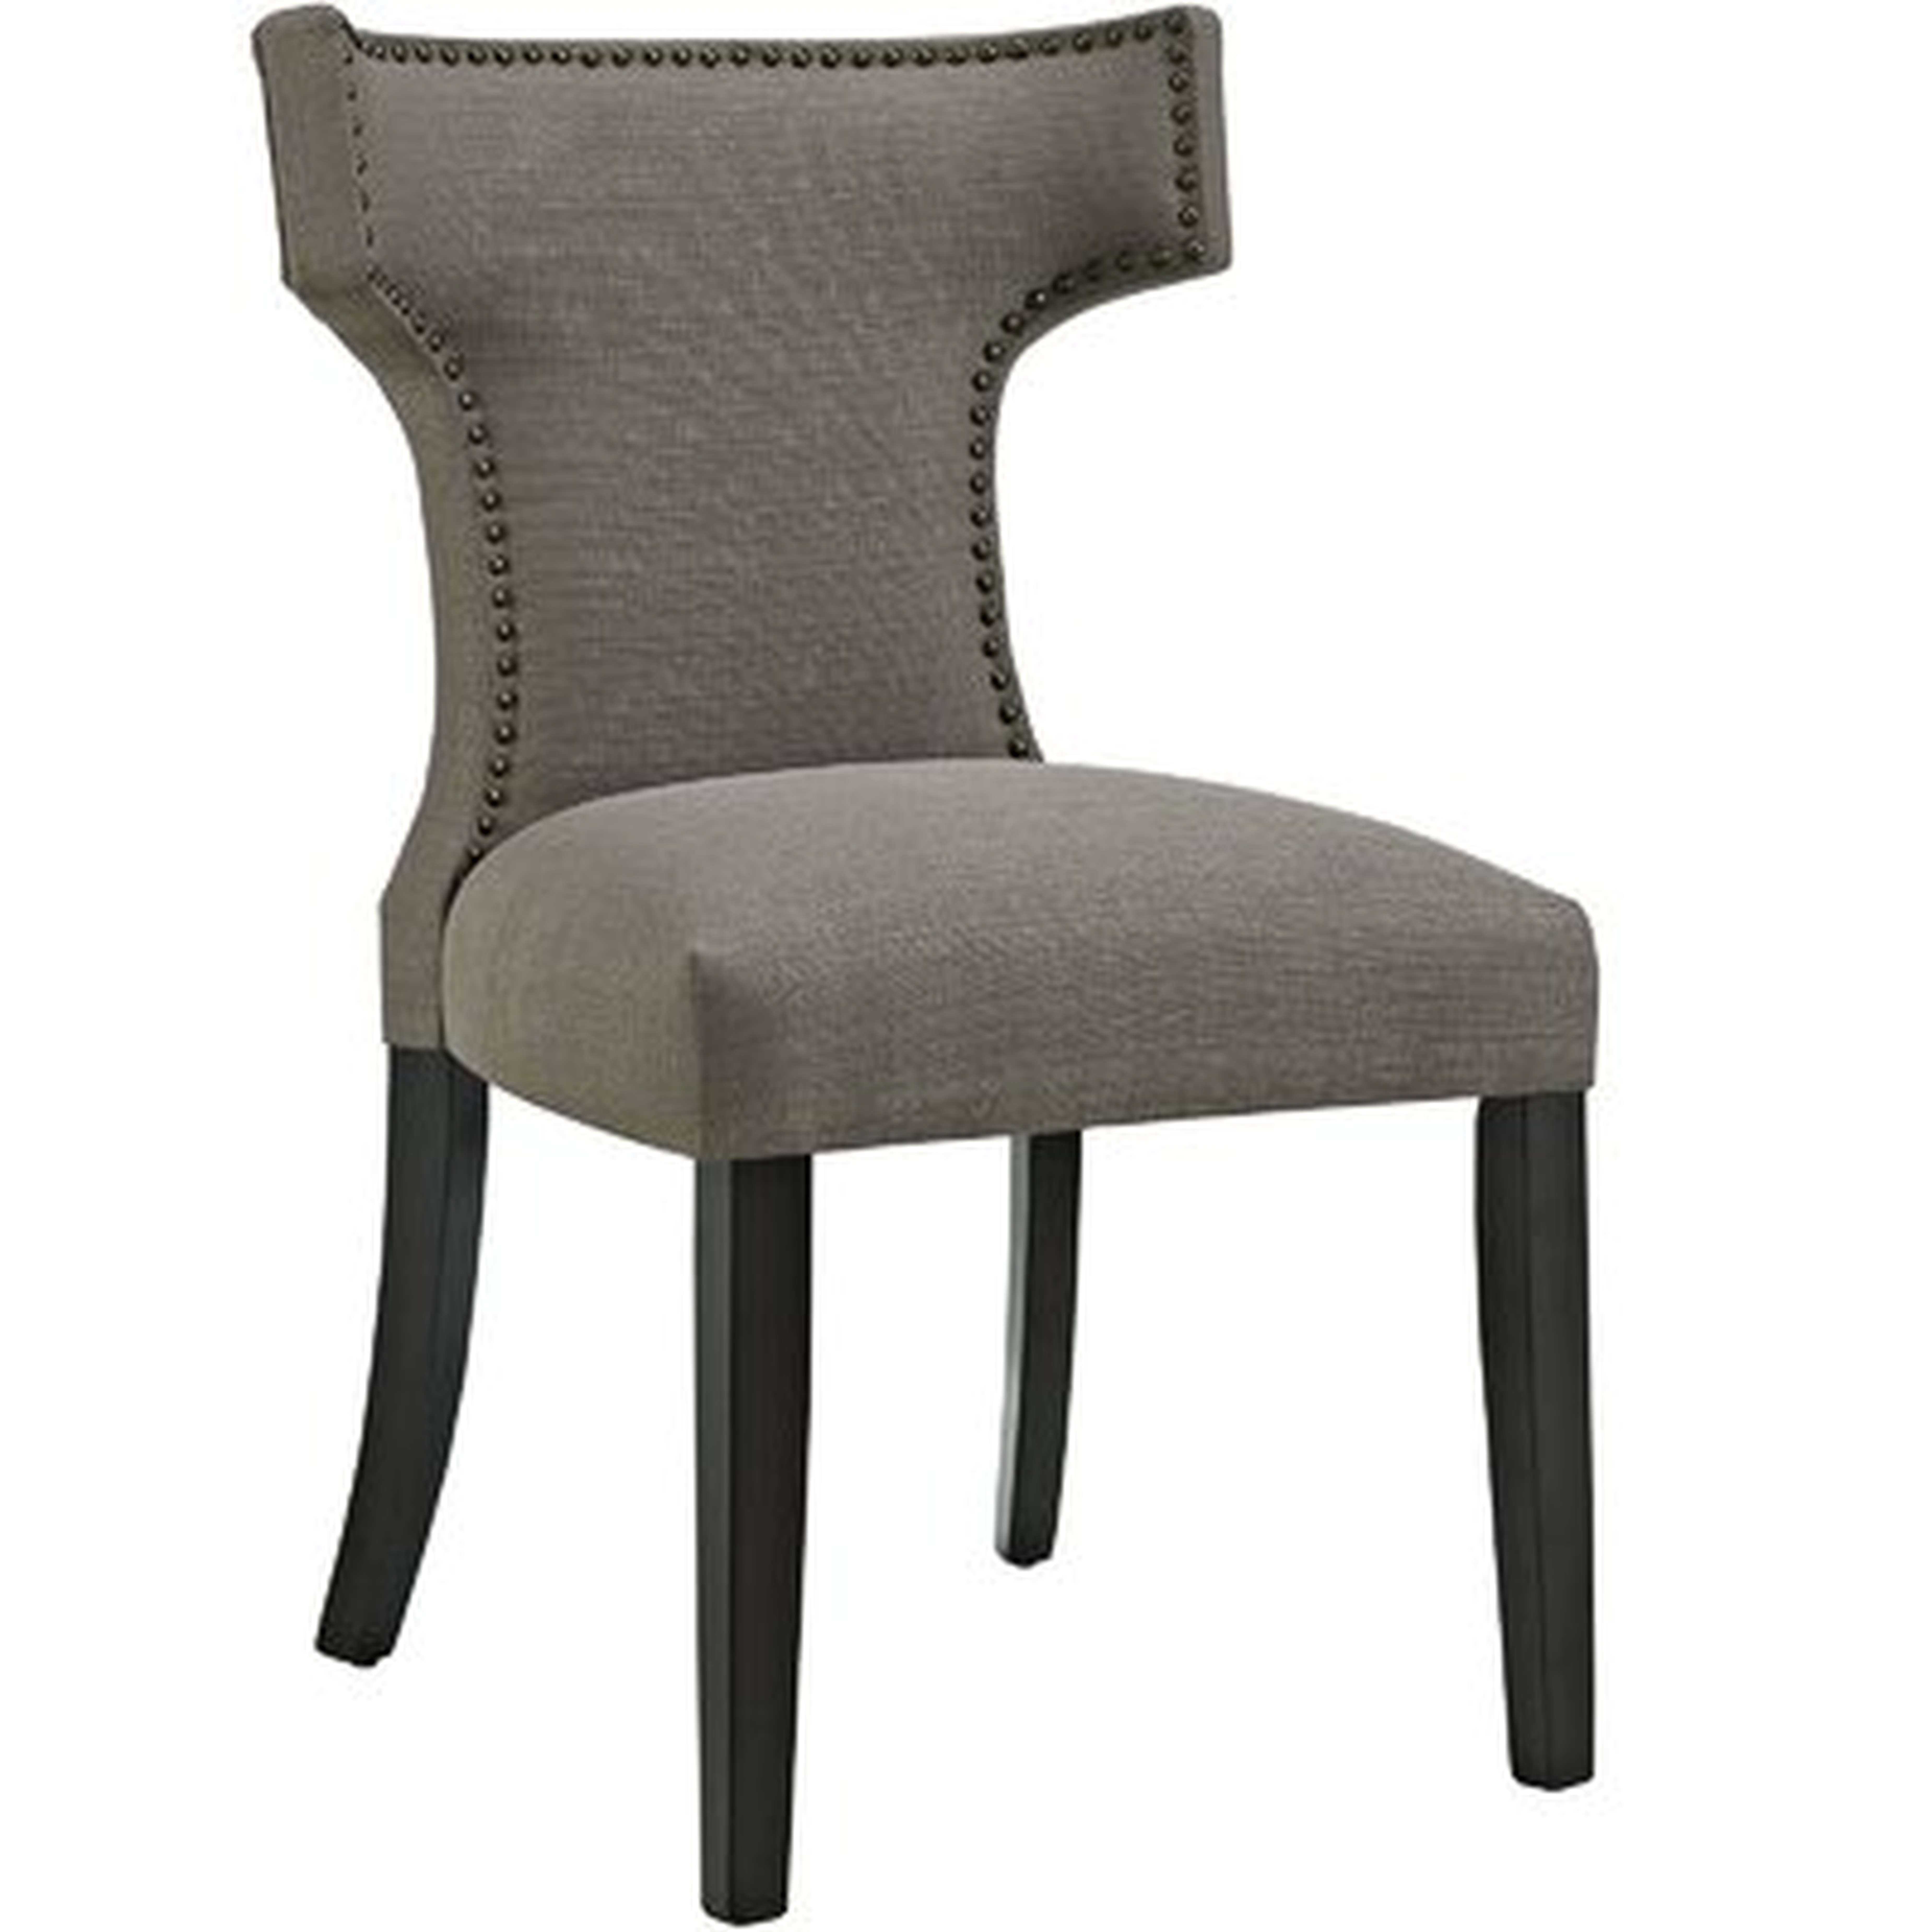 Niles Curve Upholstered Dining Chair - Birch Lane